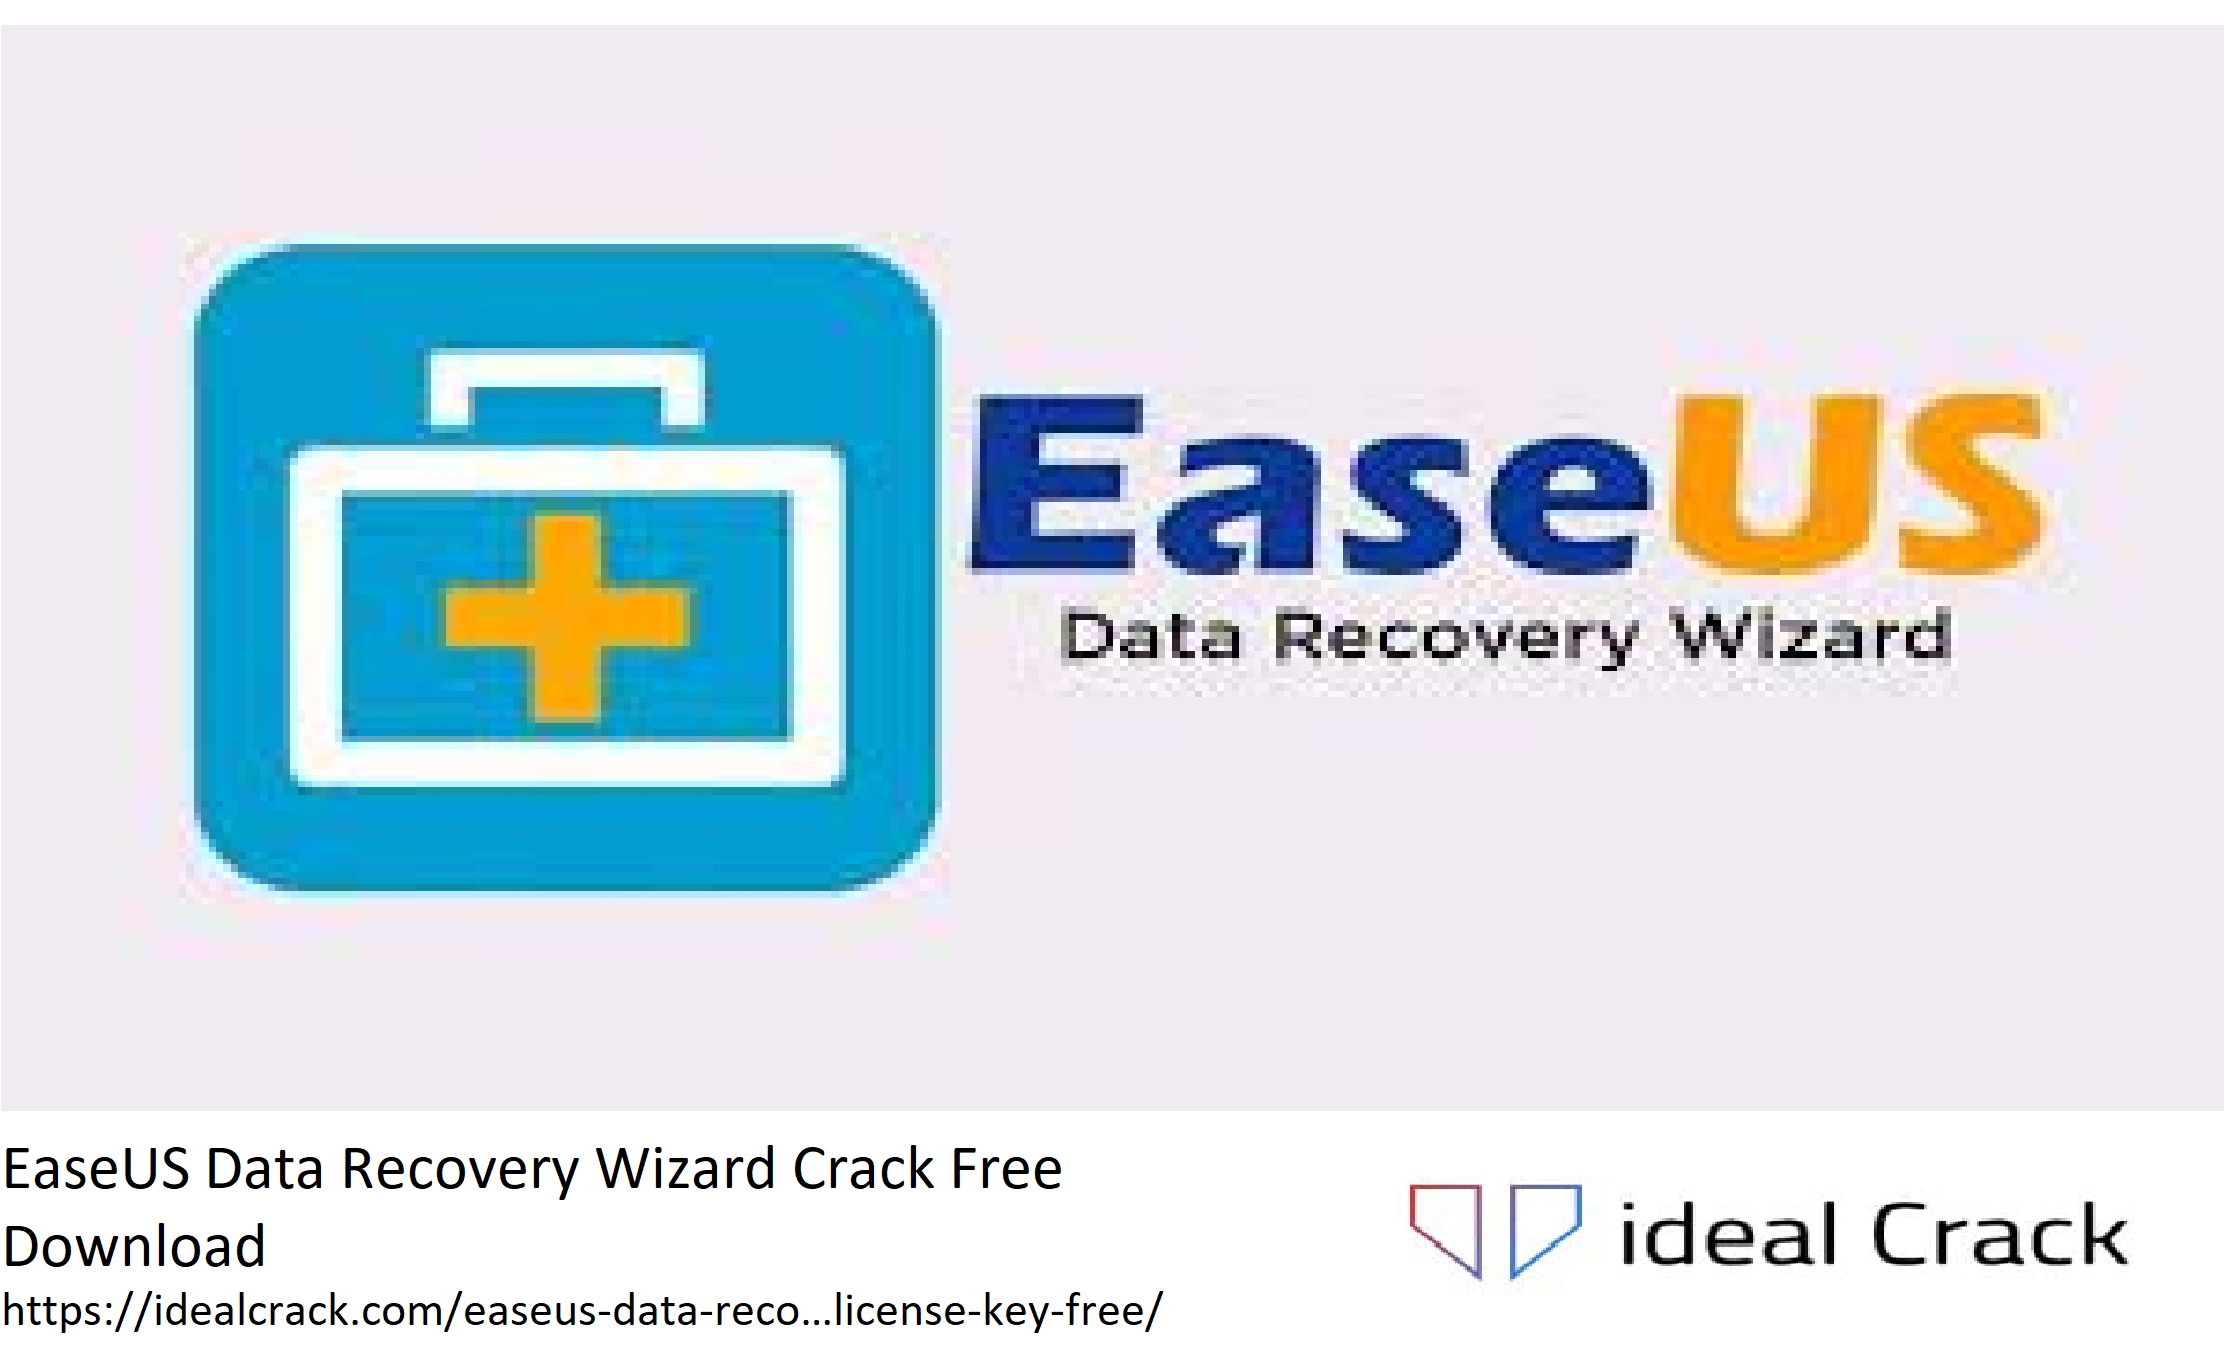 EaseUS Data Recovery Wizard Crack Free Download